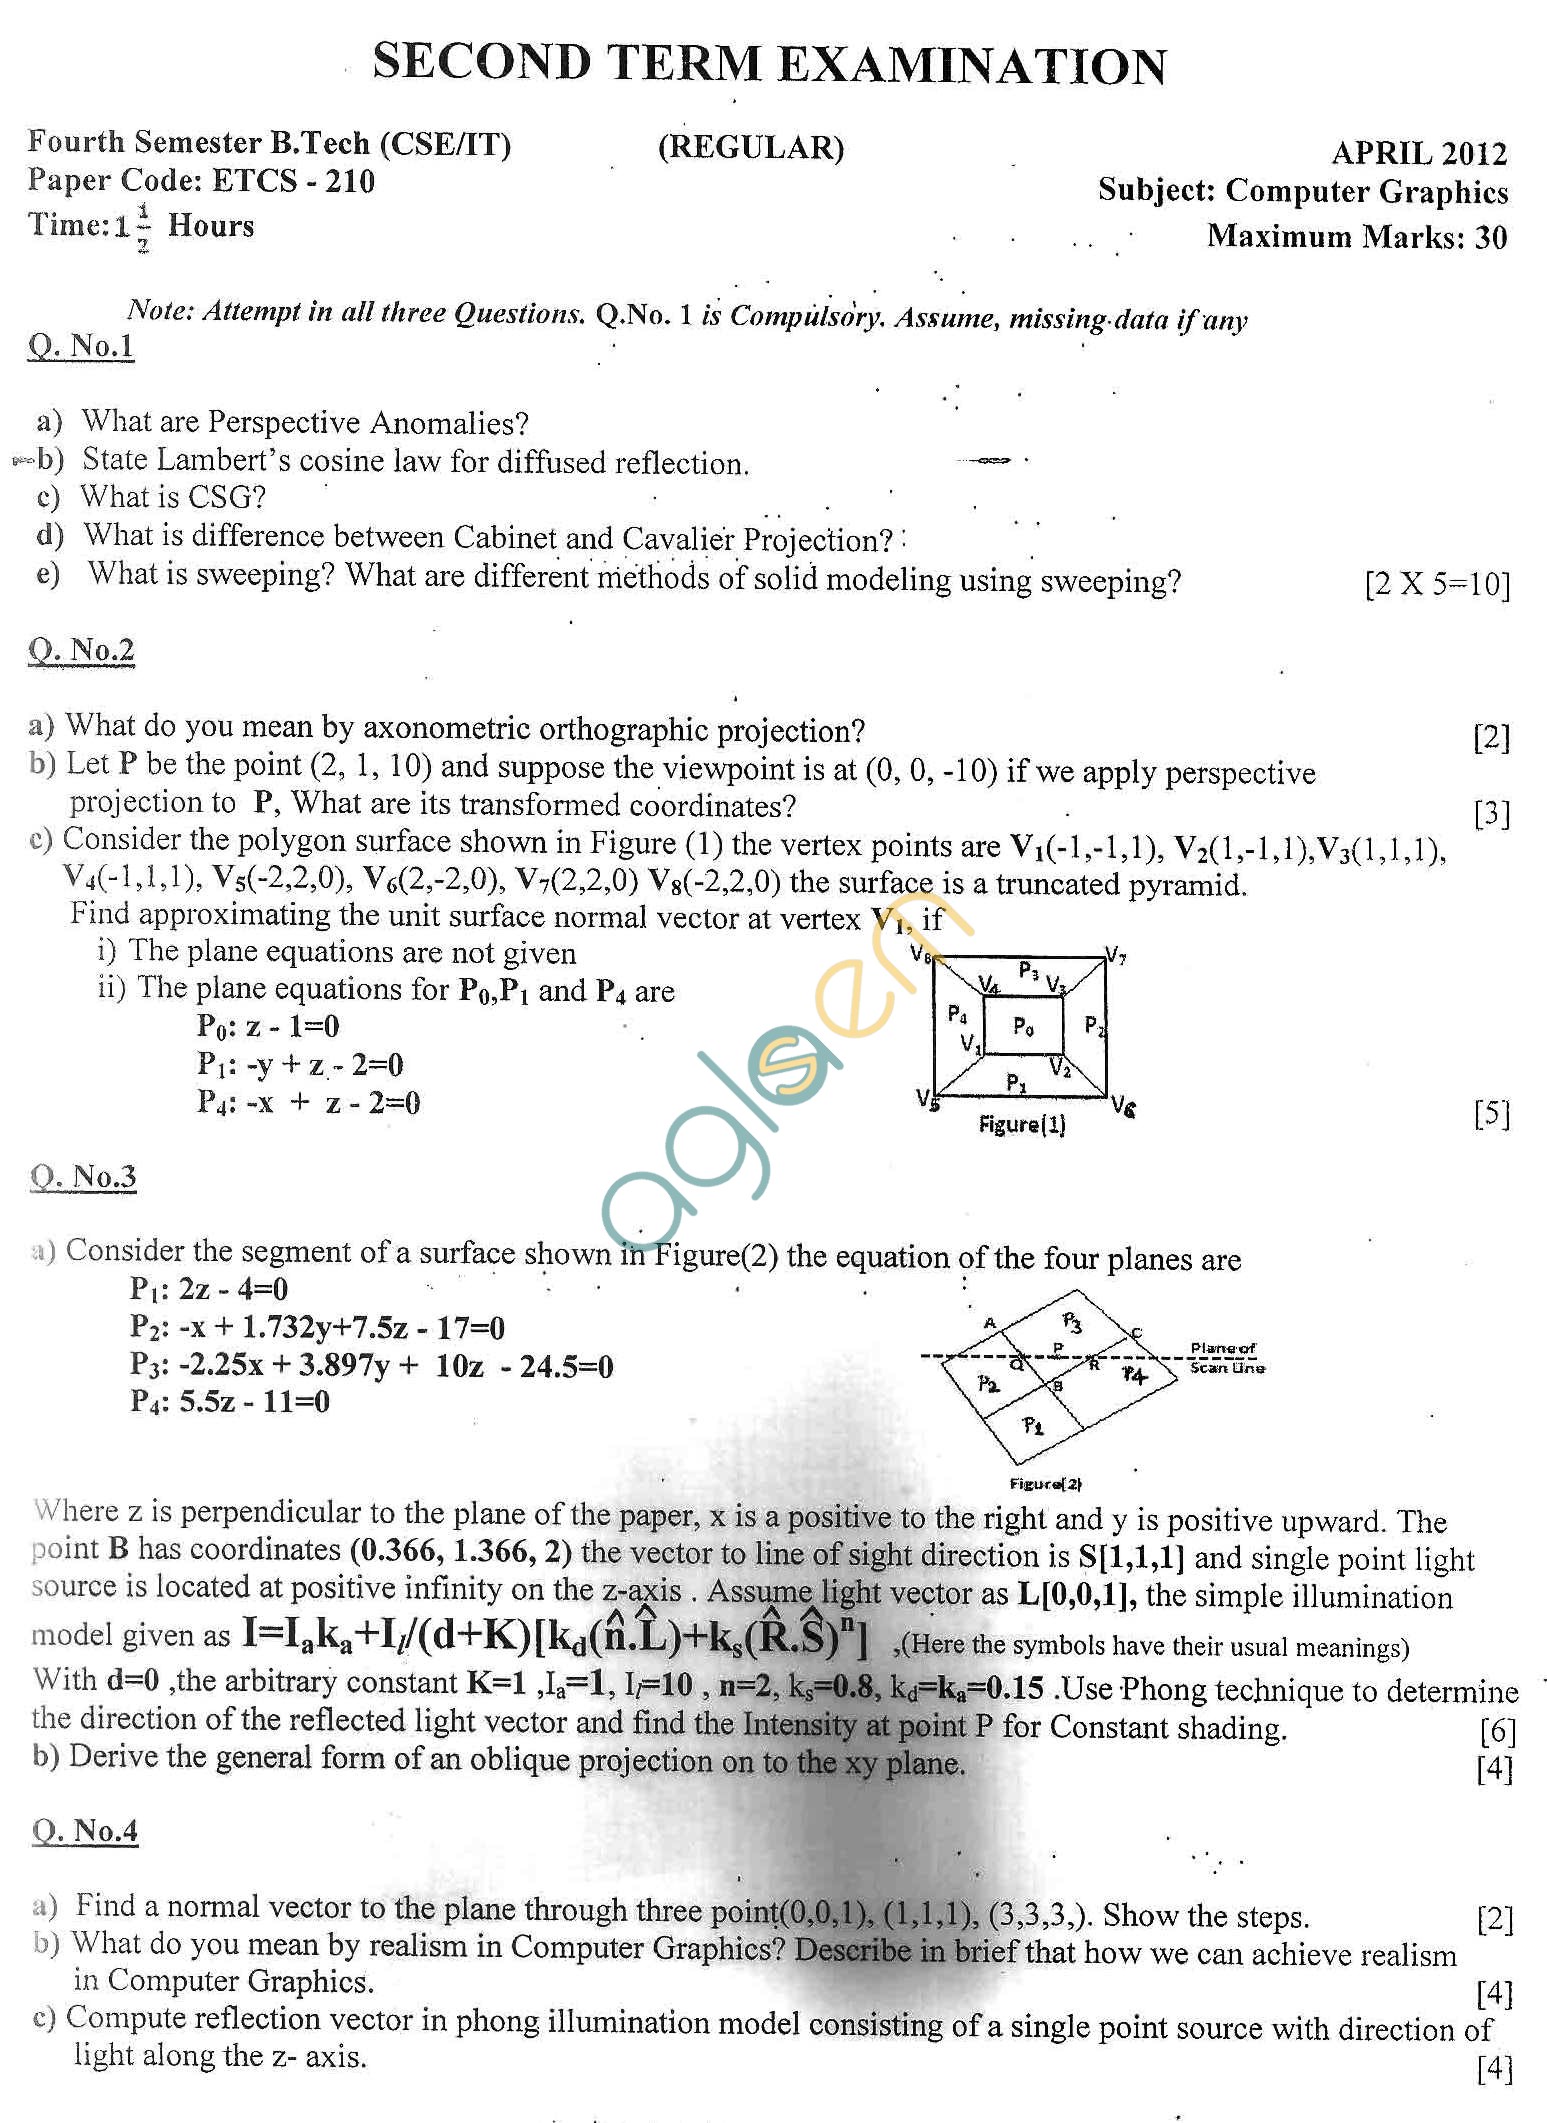 GGSIPU Question Papers Fourth Semester  Second Term 2012  ETCS-210